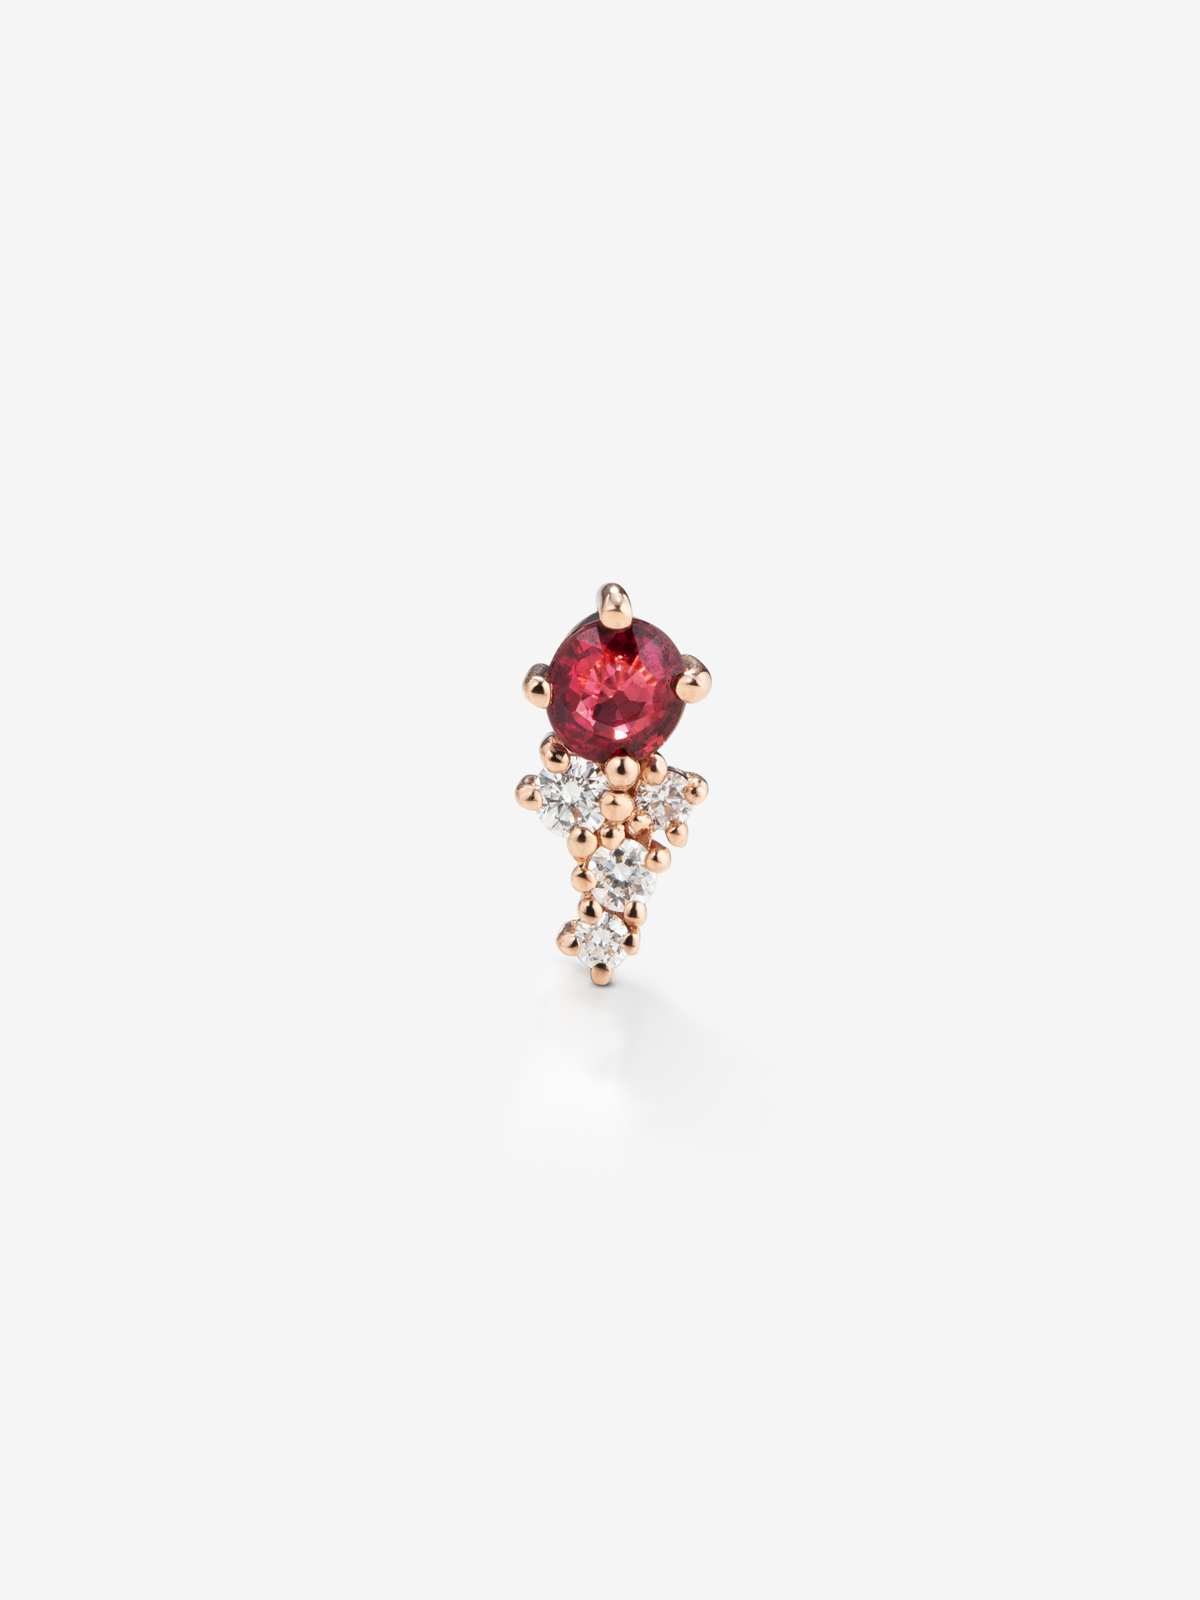 Right single earring made of 18K rose gold with ruby and diamonds.